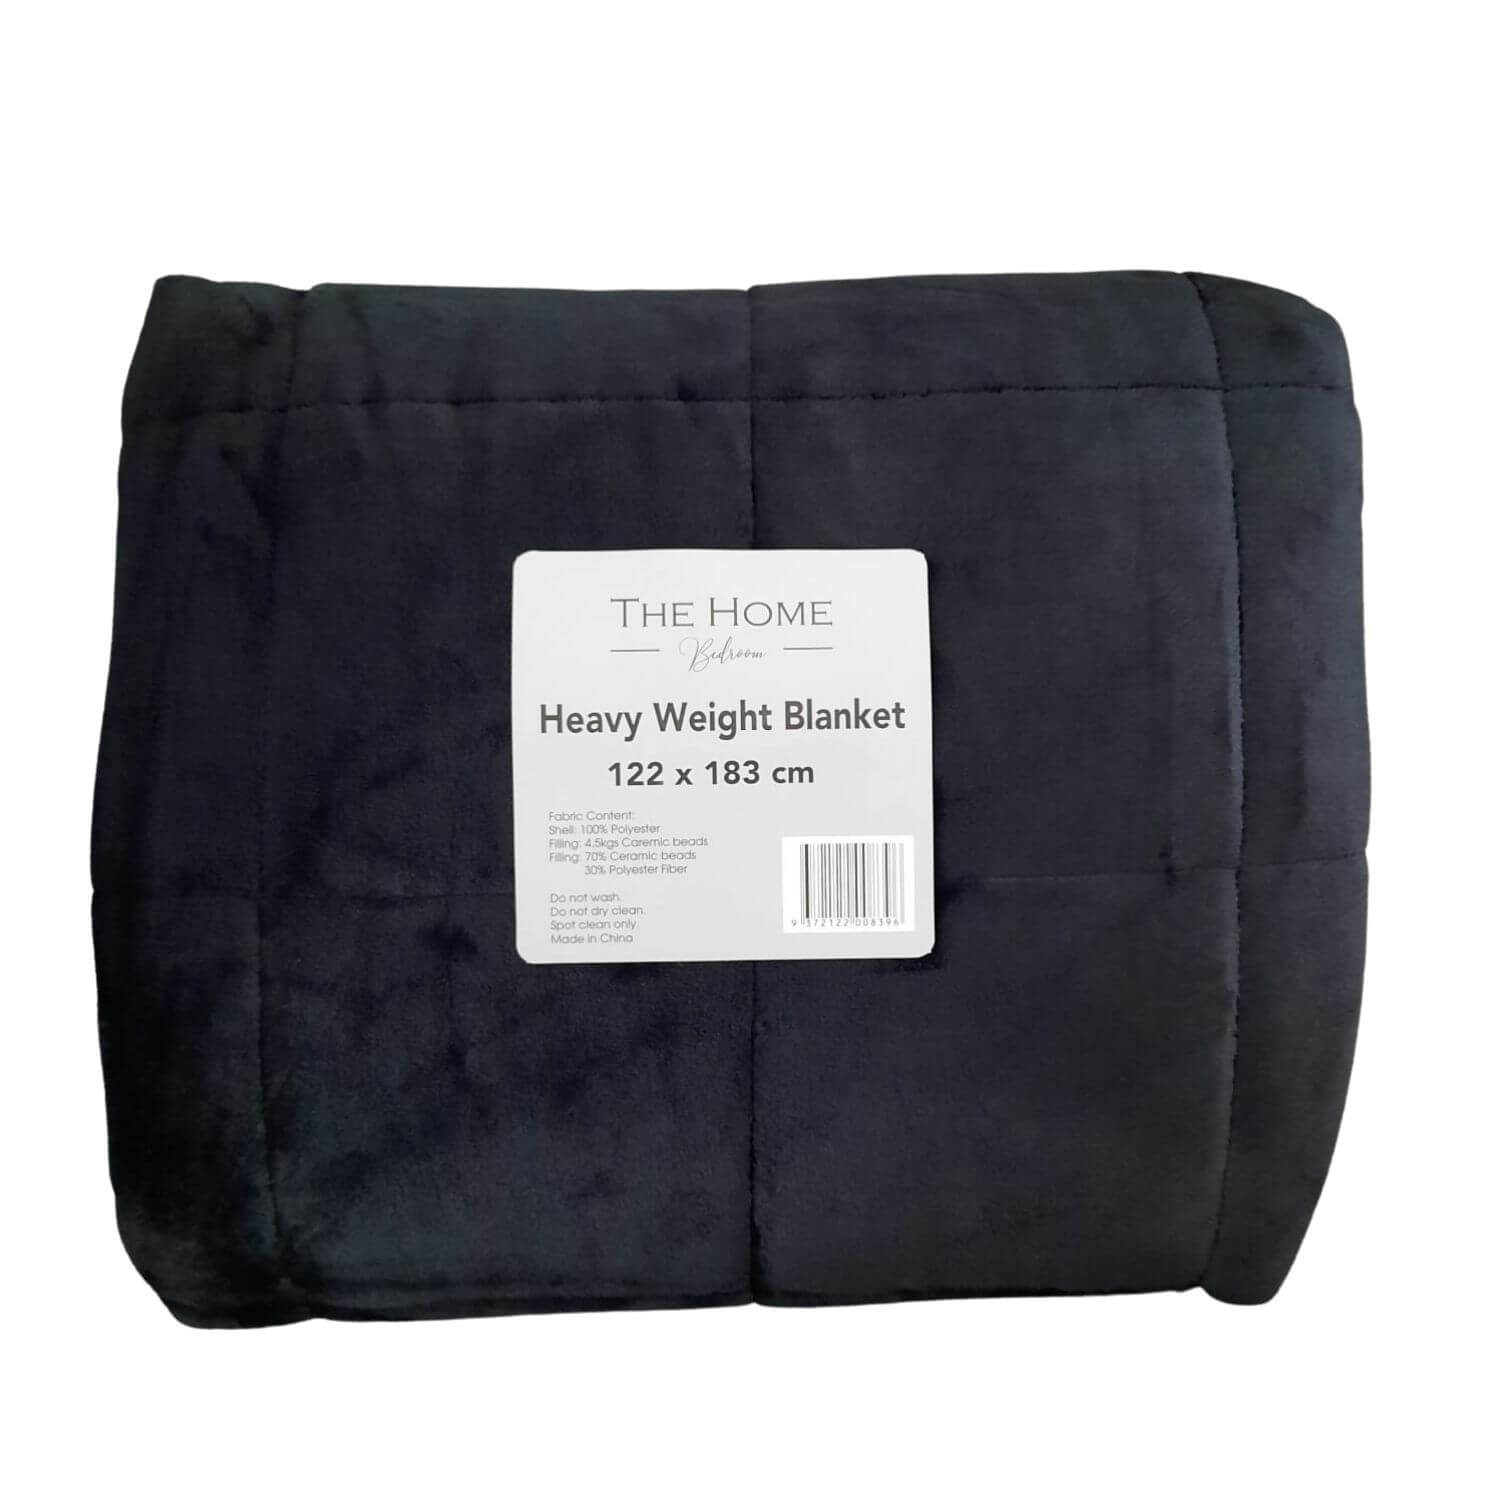 The Home Bedroom Weighted Blanket - 4Kg 1 Shaws Department Stores